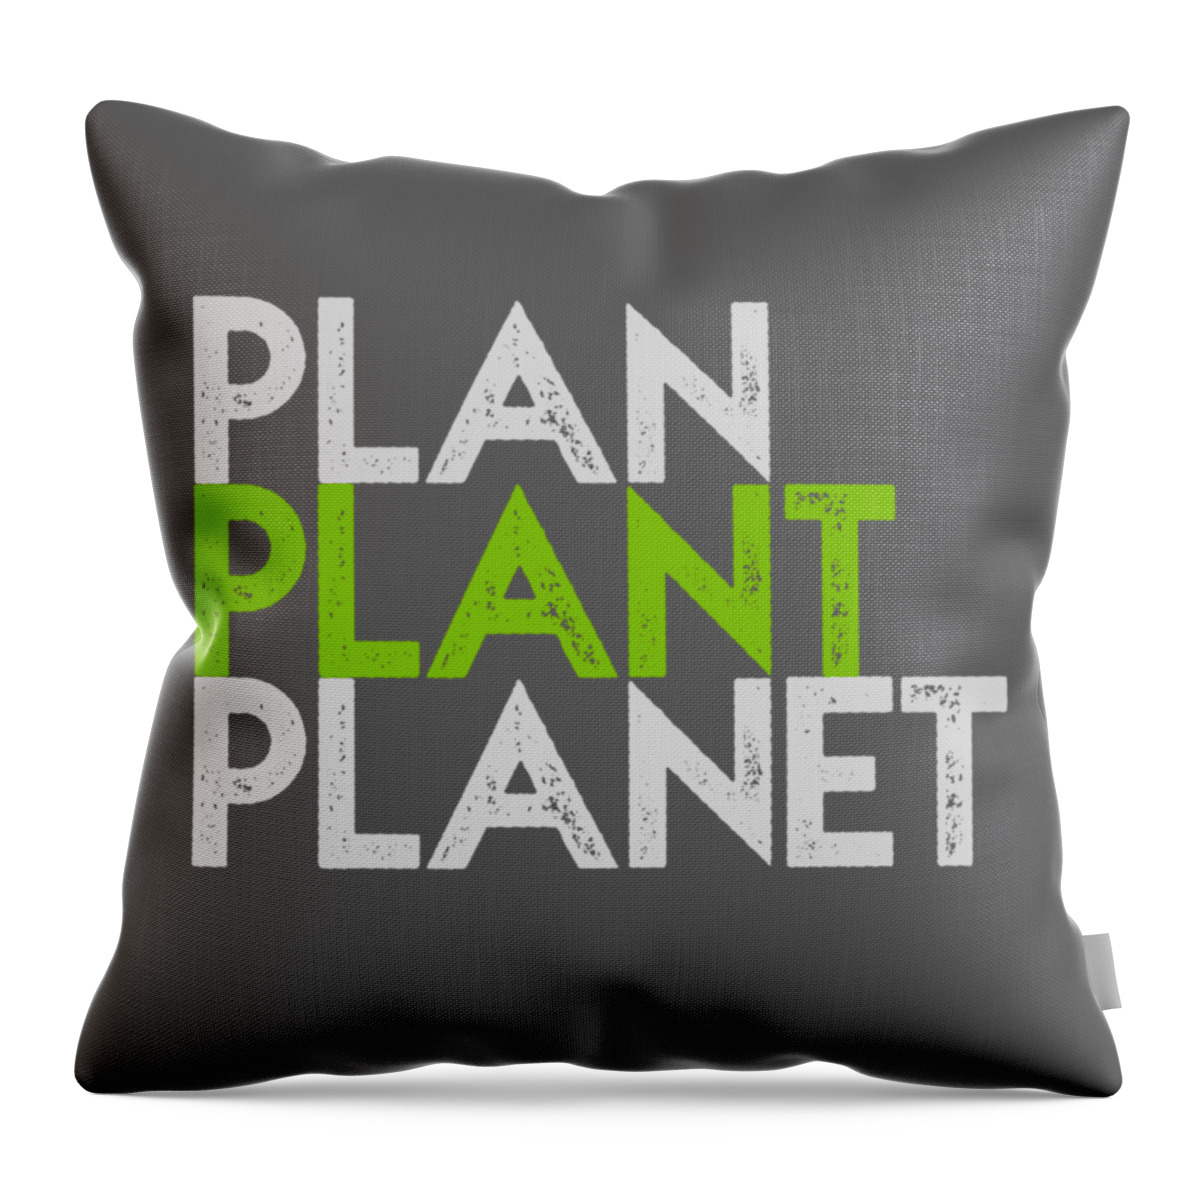 Typography Throw Pillow featuring the drawing Plan Plant Planet - green and gray standard spacing by Charlie Szoradi